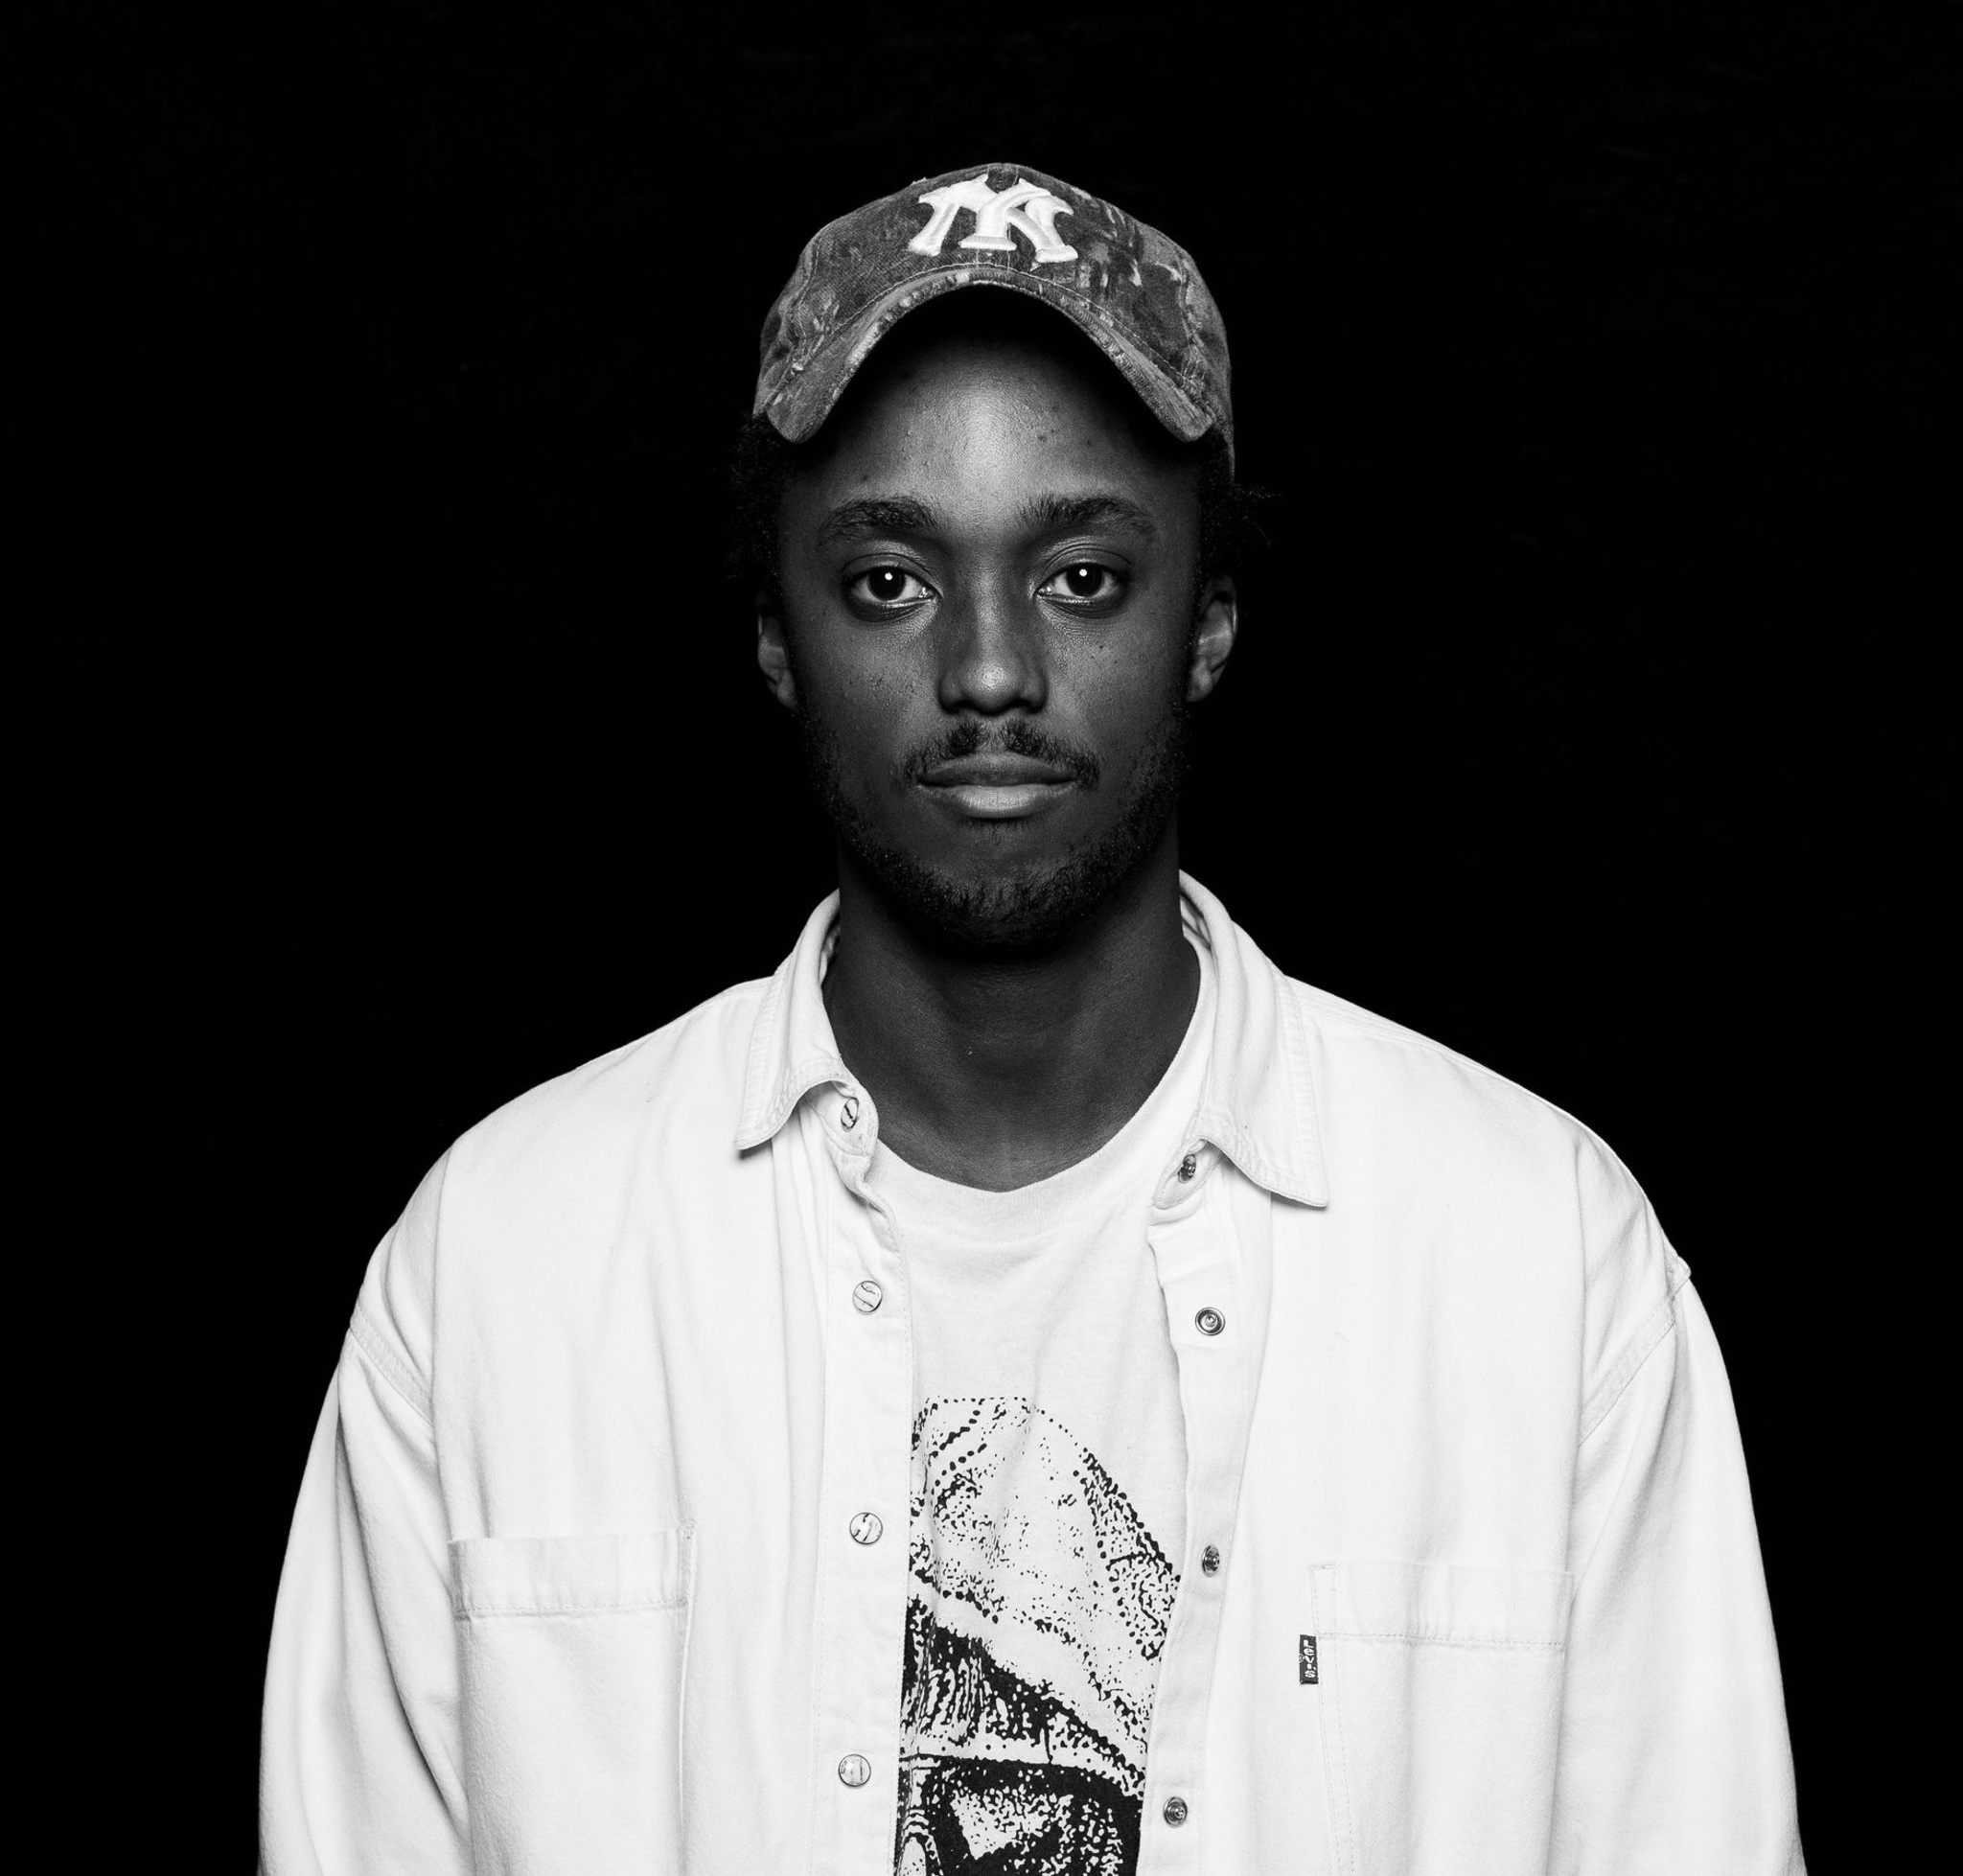 This is a black-and-white headshot of Nile Harris. They pose against a dark background. They are wearing a baseball cap and a white button down shirt open over a tshirt.